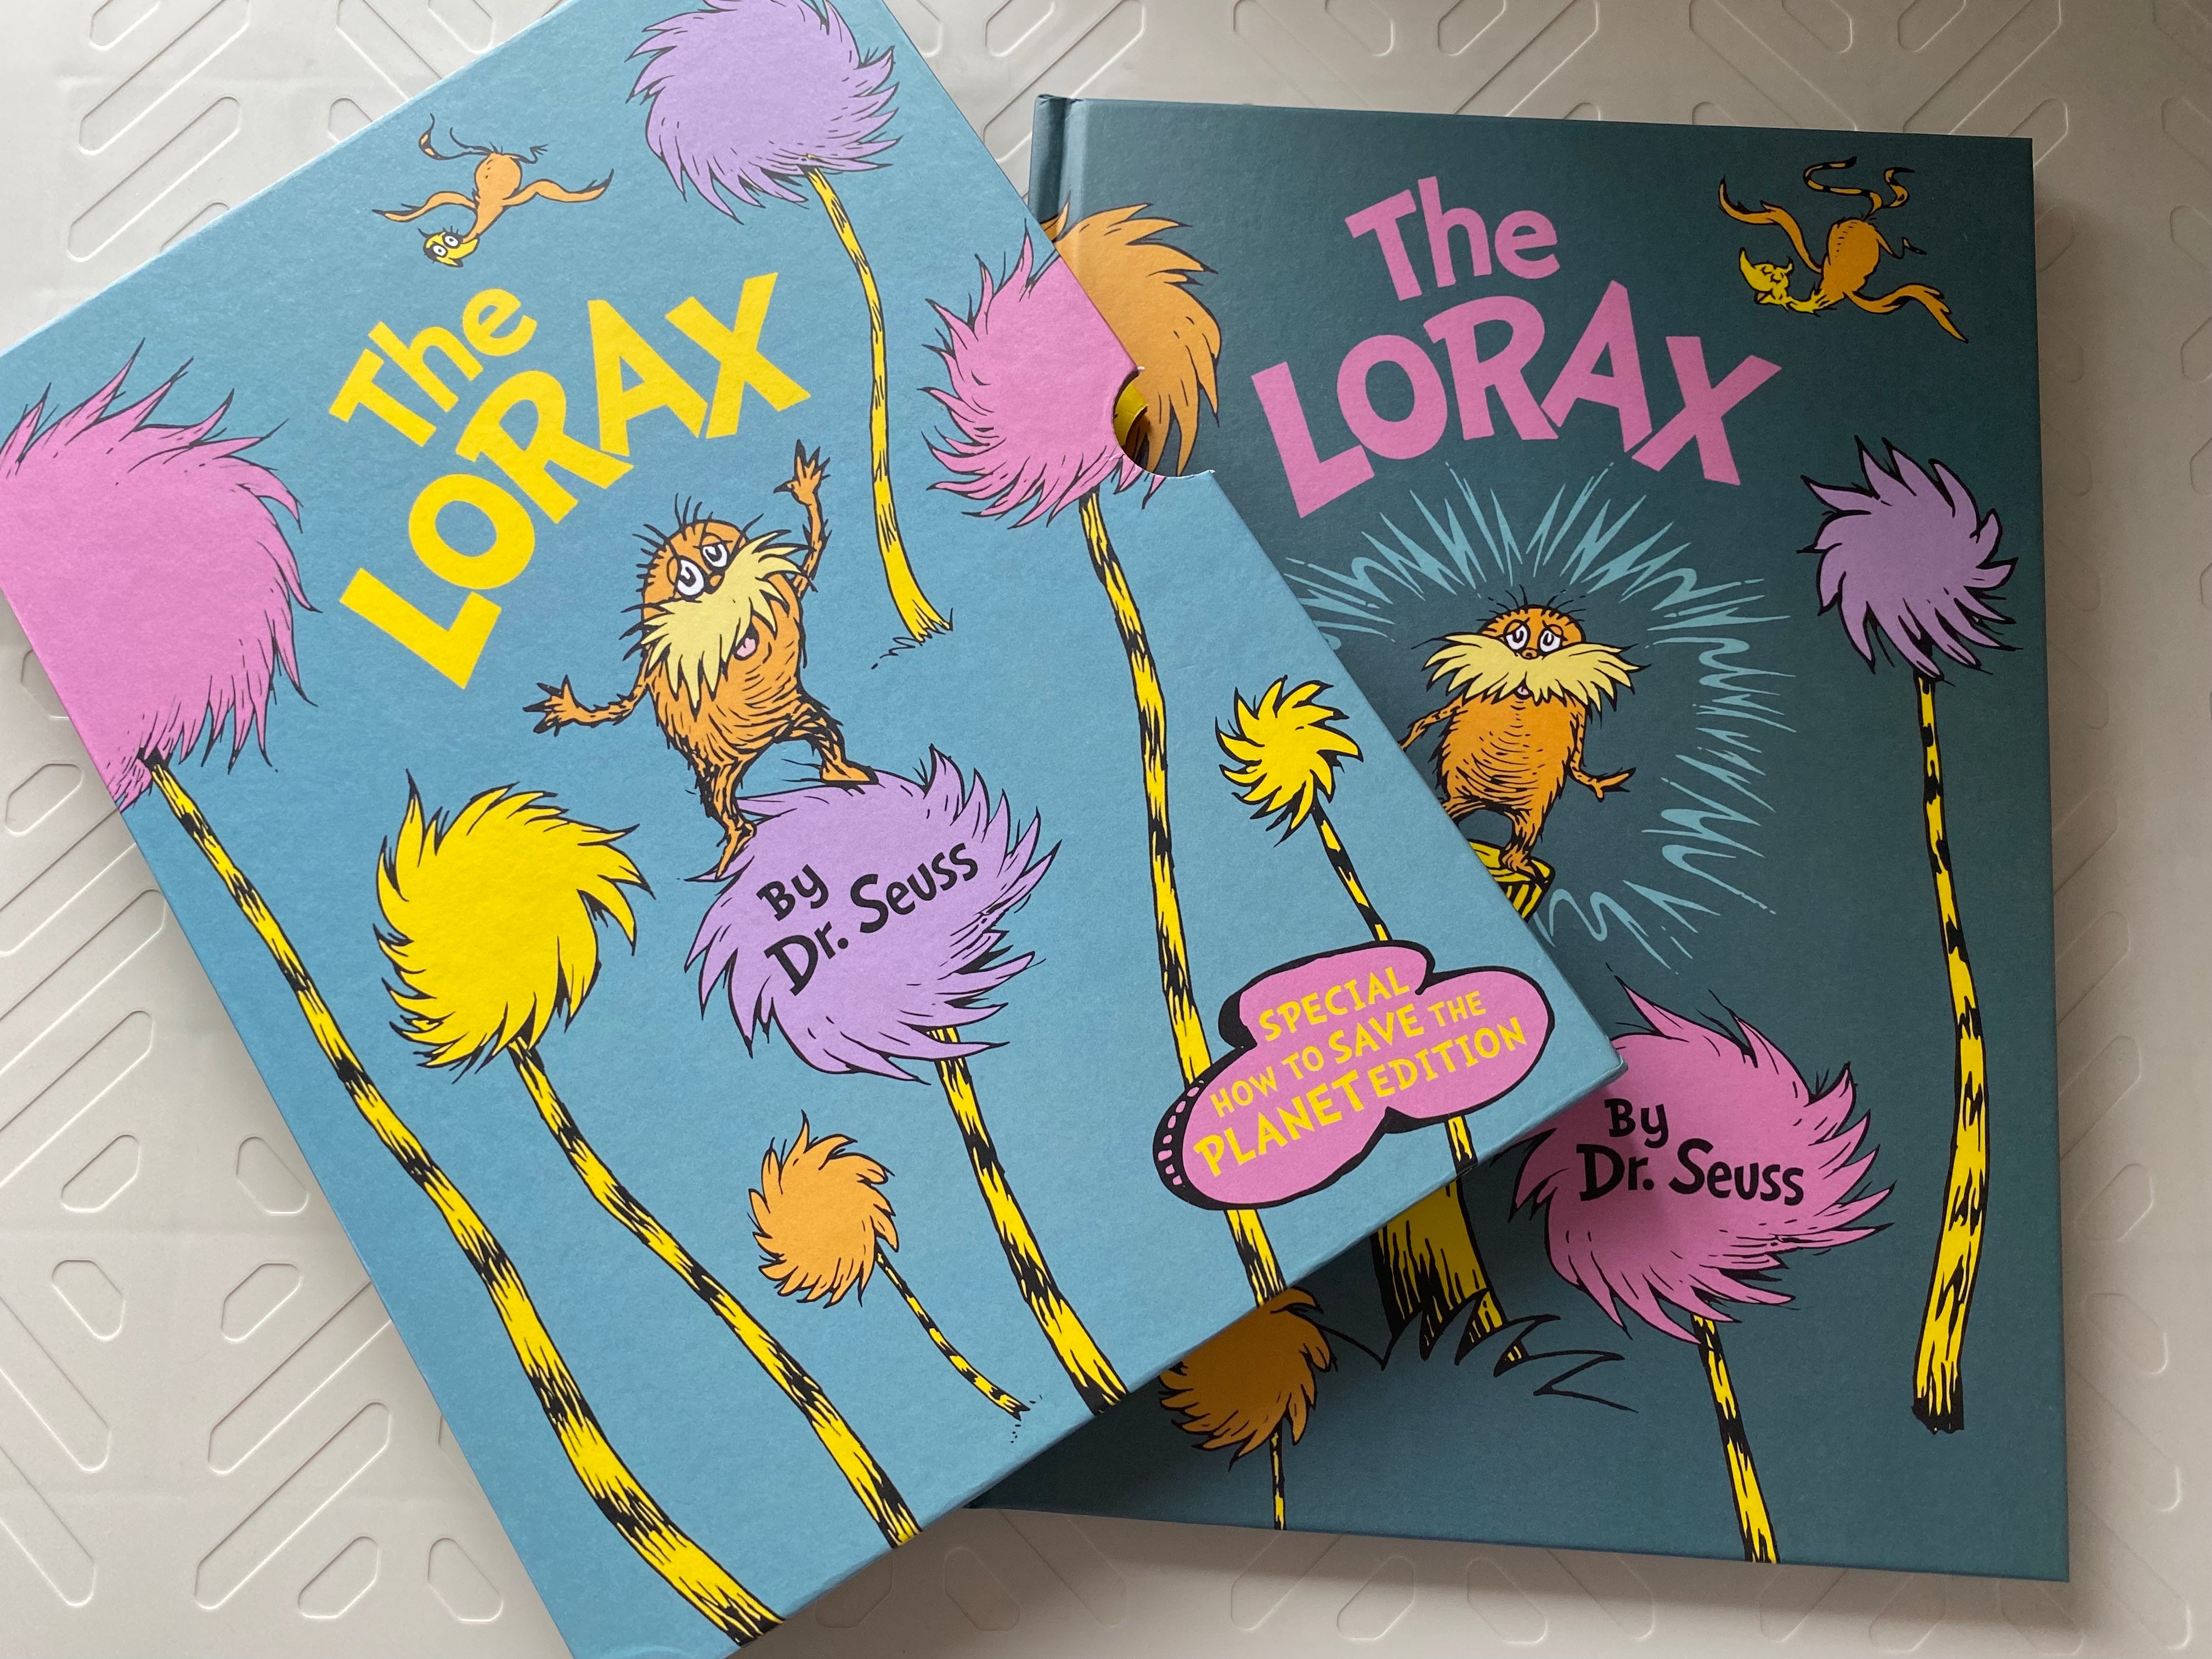 The Lorax By Dr. Seuss: Special How to Save the Planet Edition